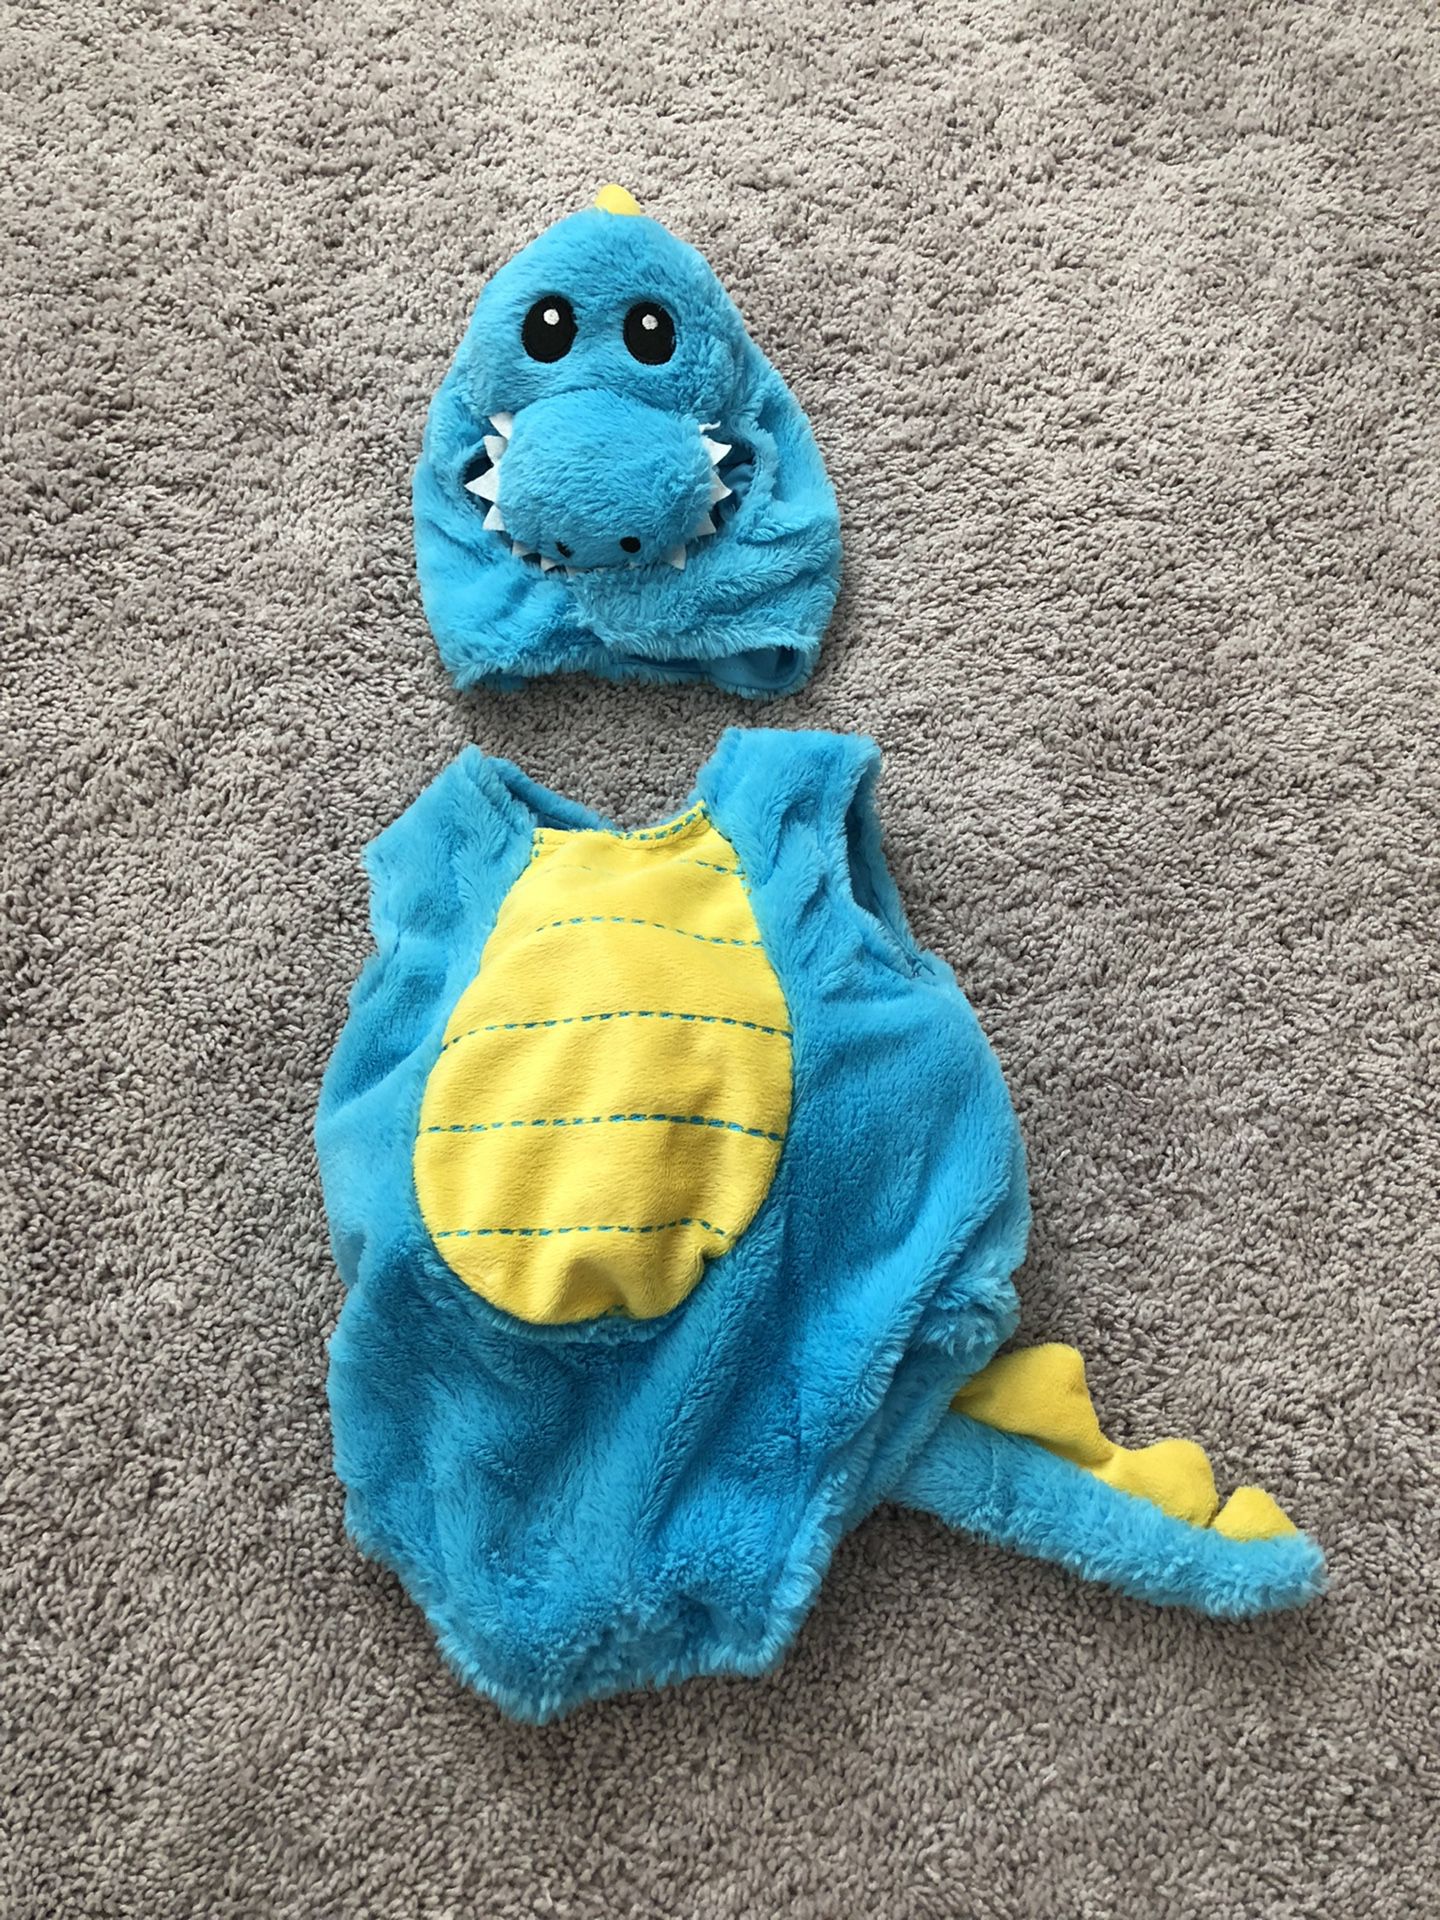 Baby Dinosaur Costume - Size 6 to 12 Months 